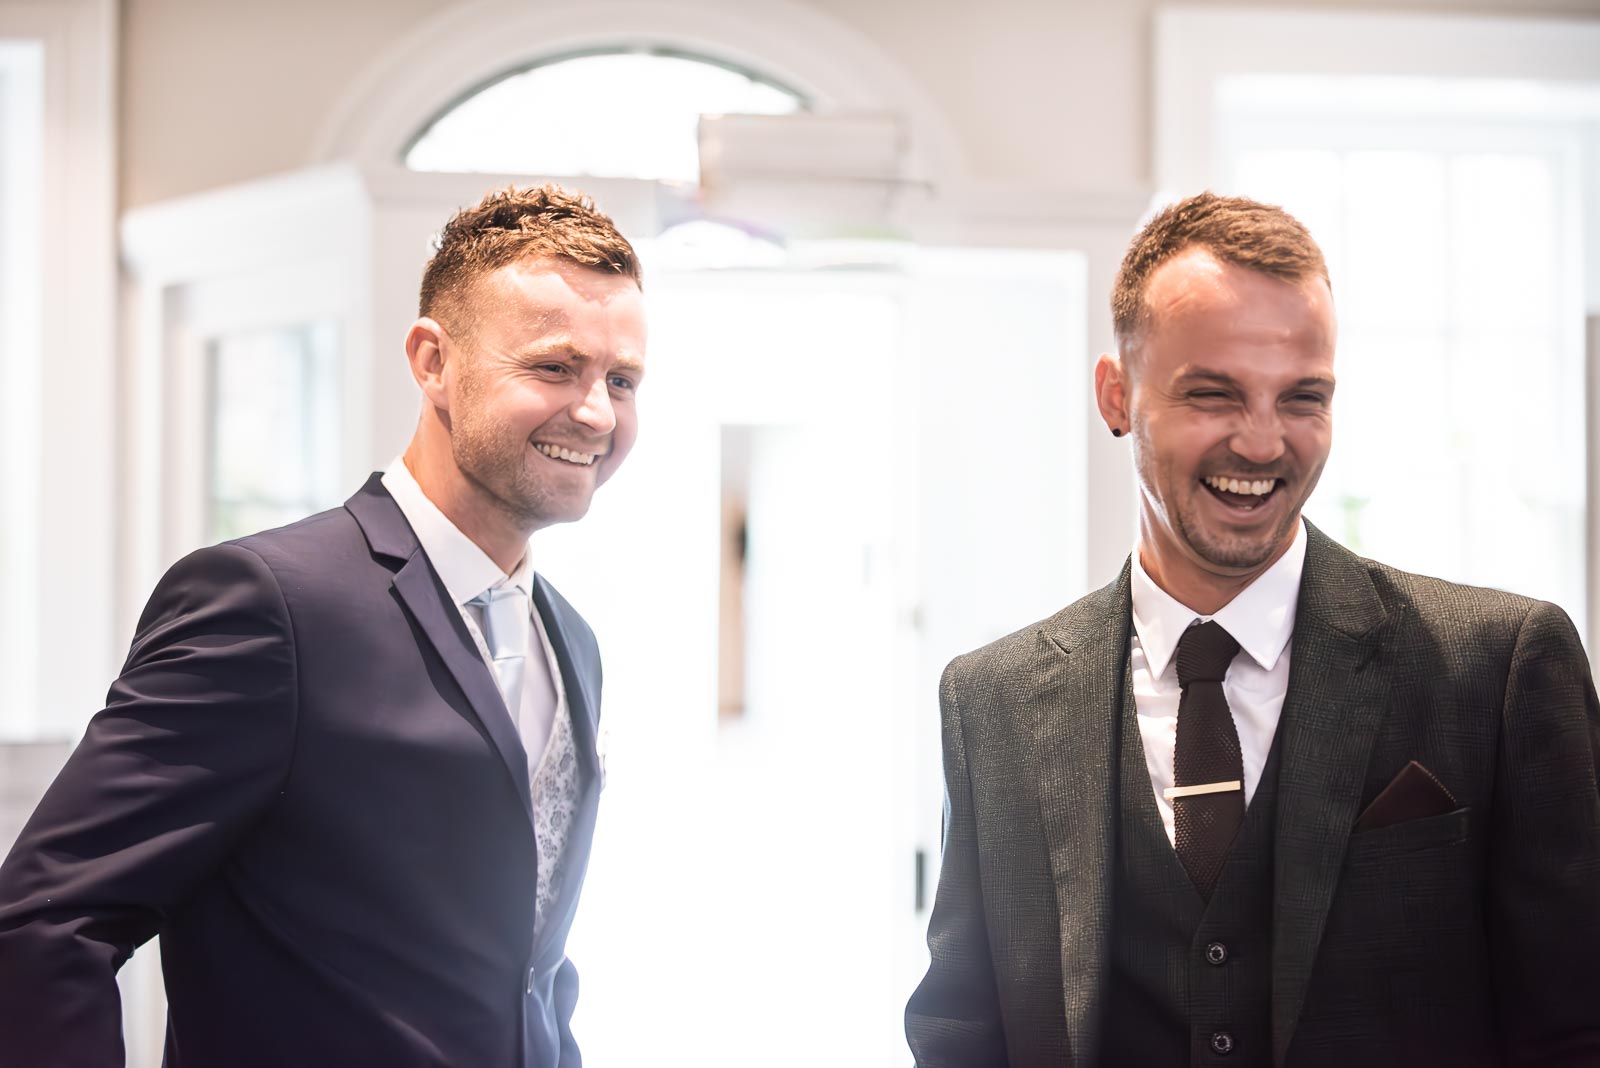 Dean and a guest enjoy a funny moment at the front door of Pelham House Hotel, Lewes before his wedding to Natalie.